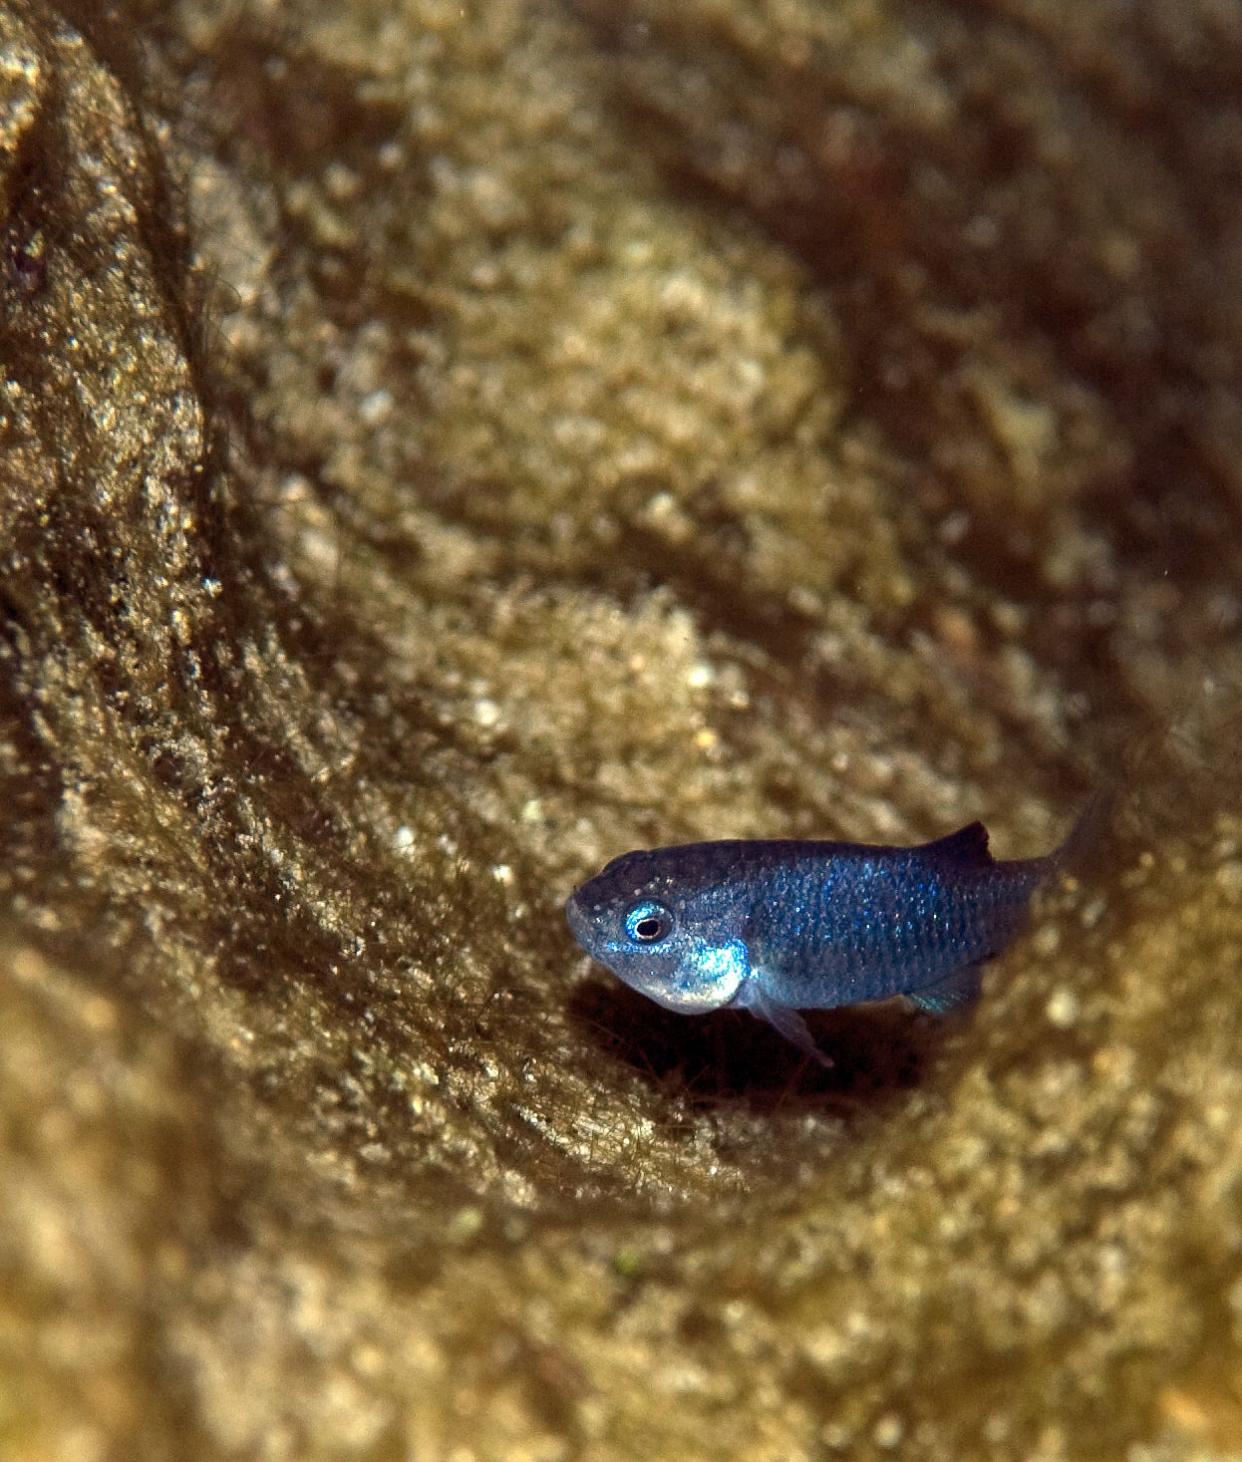 The Devils Hole pupfish have increase in population after a 25-year low.